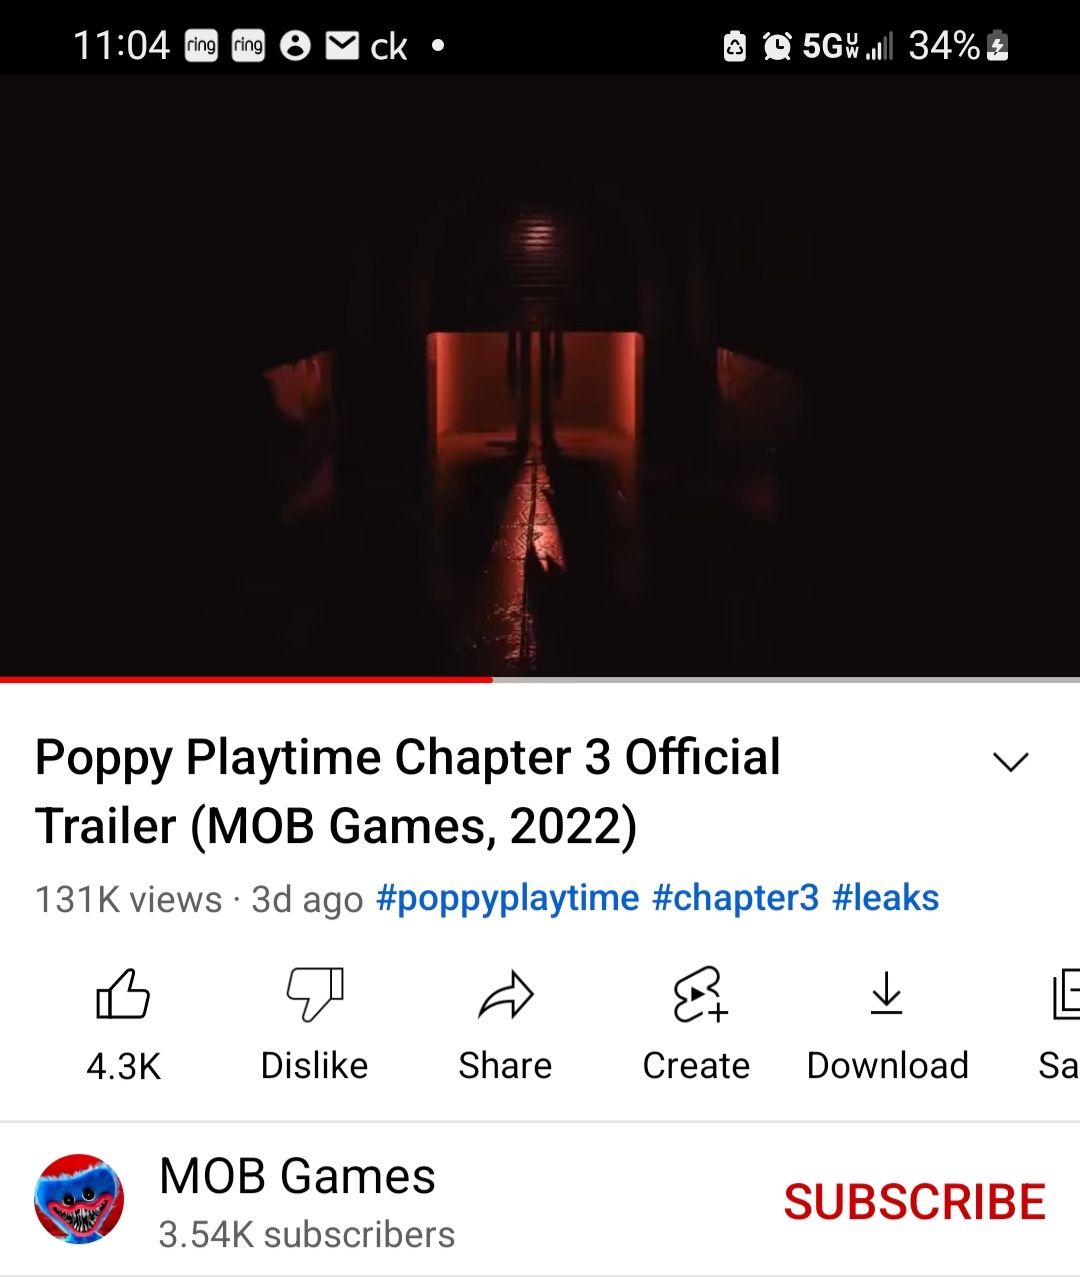 Poppy Playtime: Chapter 3 - Official Trailer 